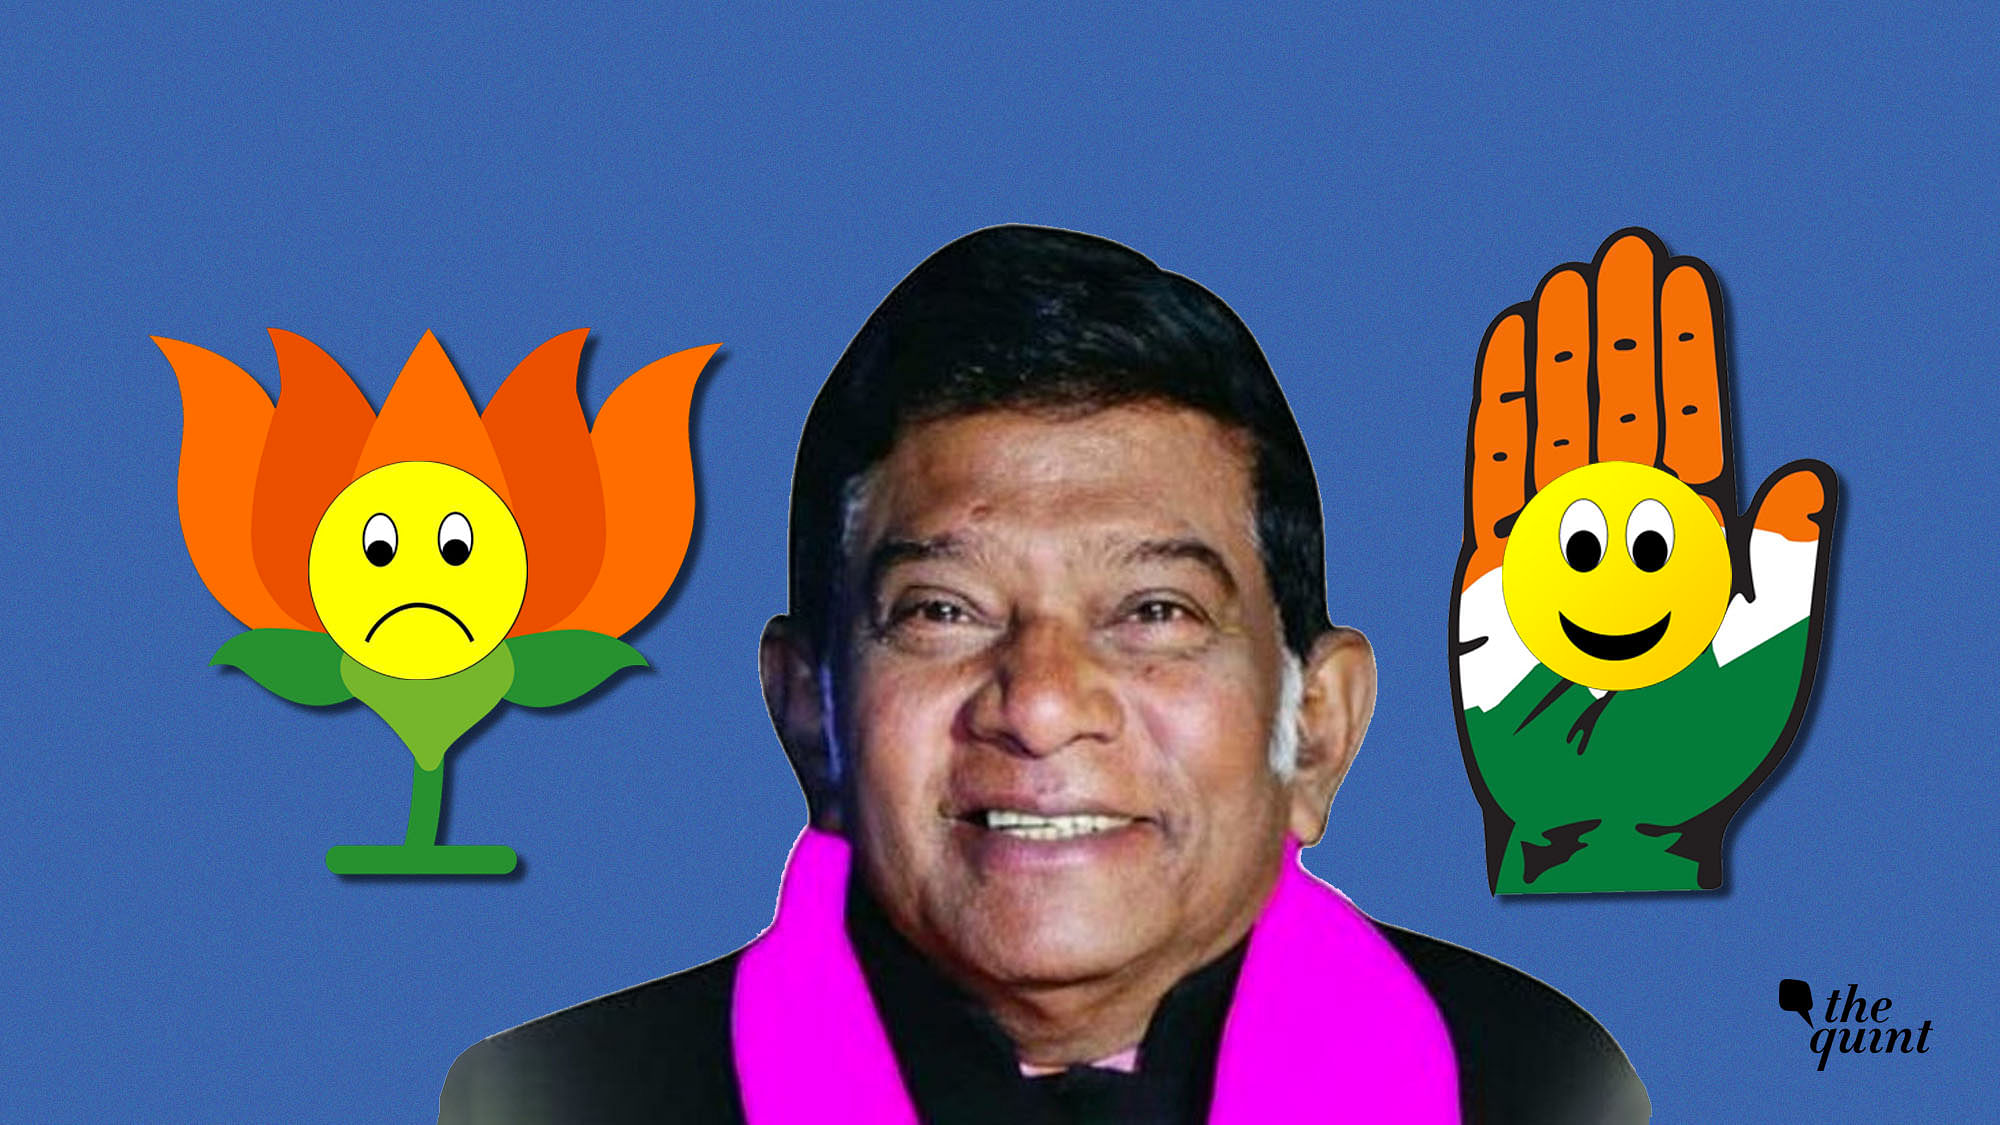 Image of Ajit Jogi and symbols of BJP and Congress used for representational purposes.